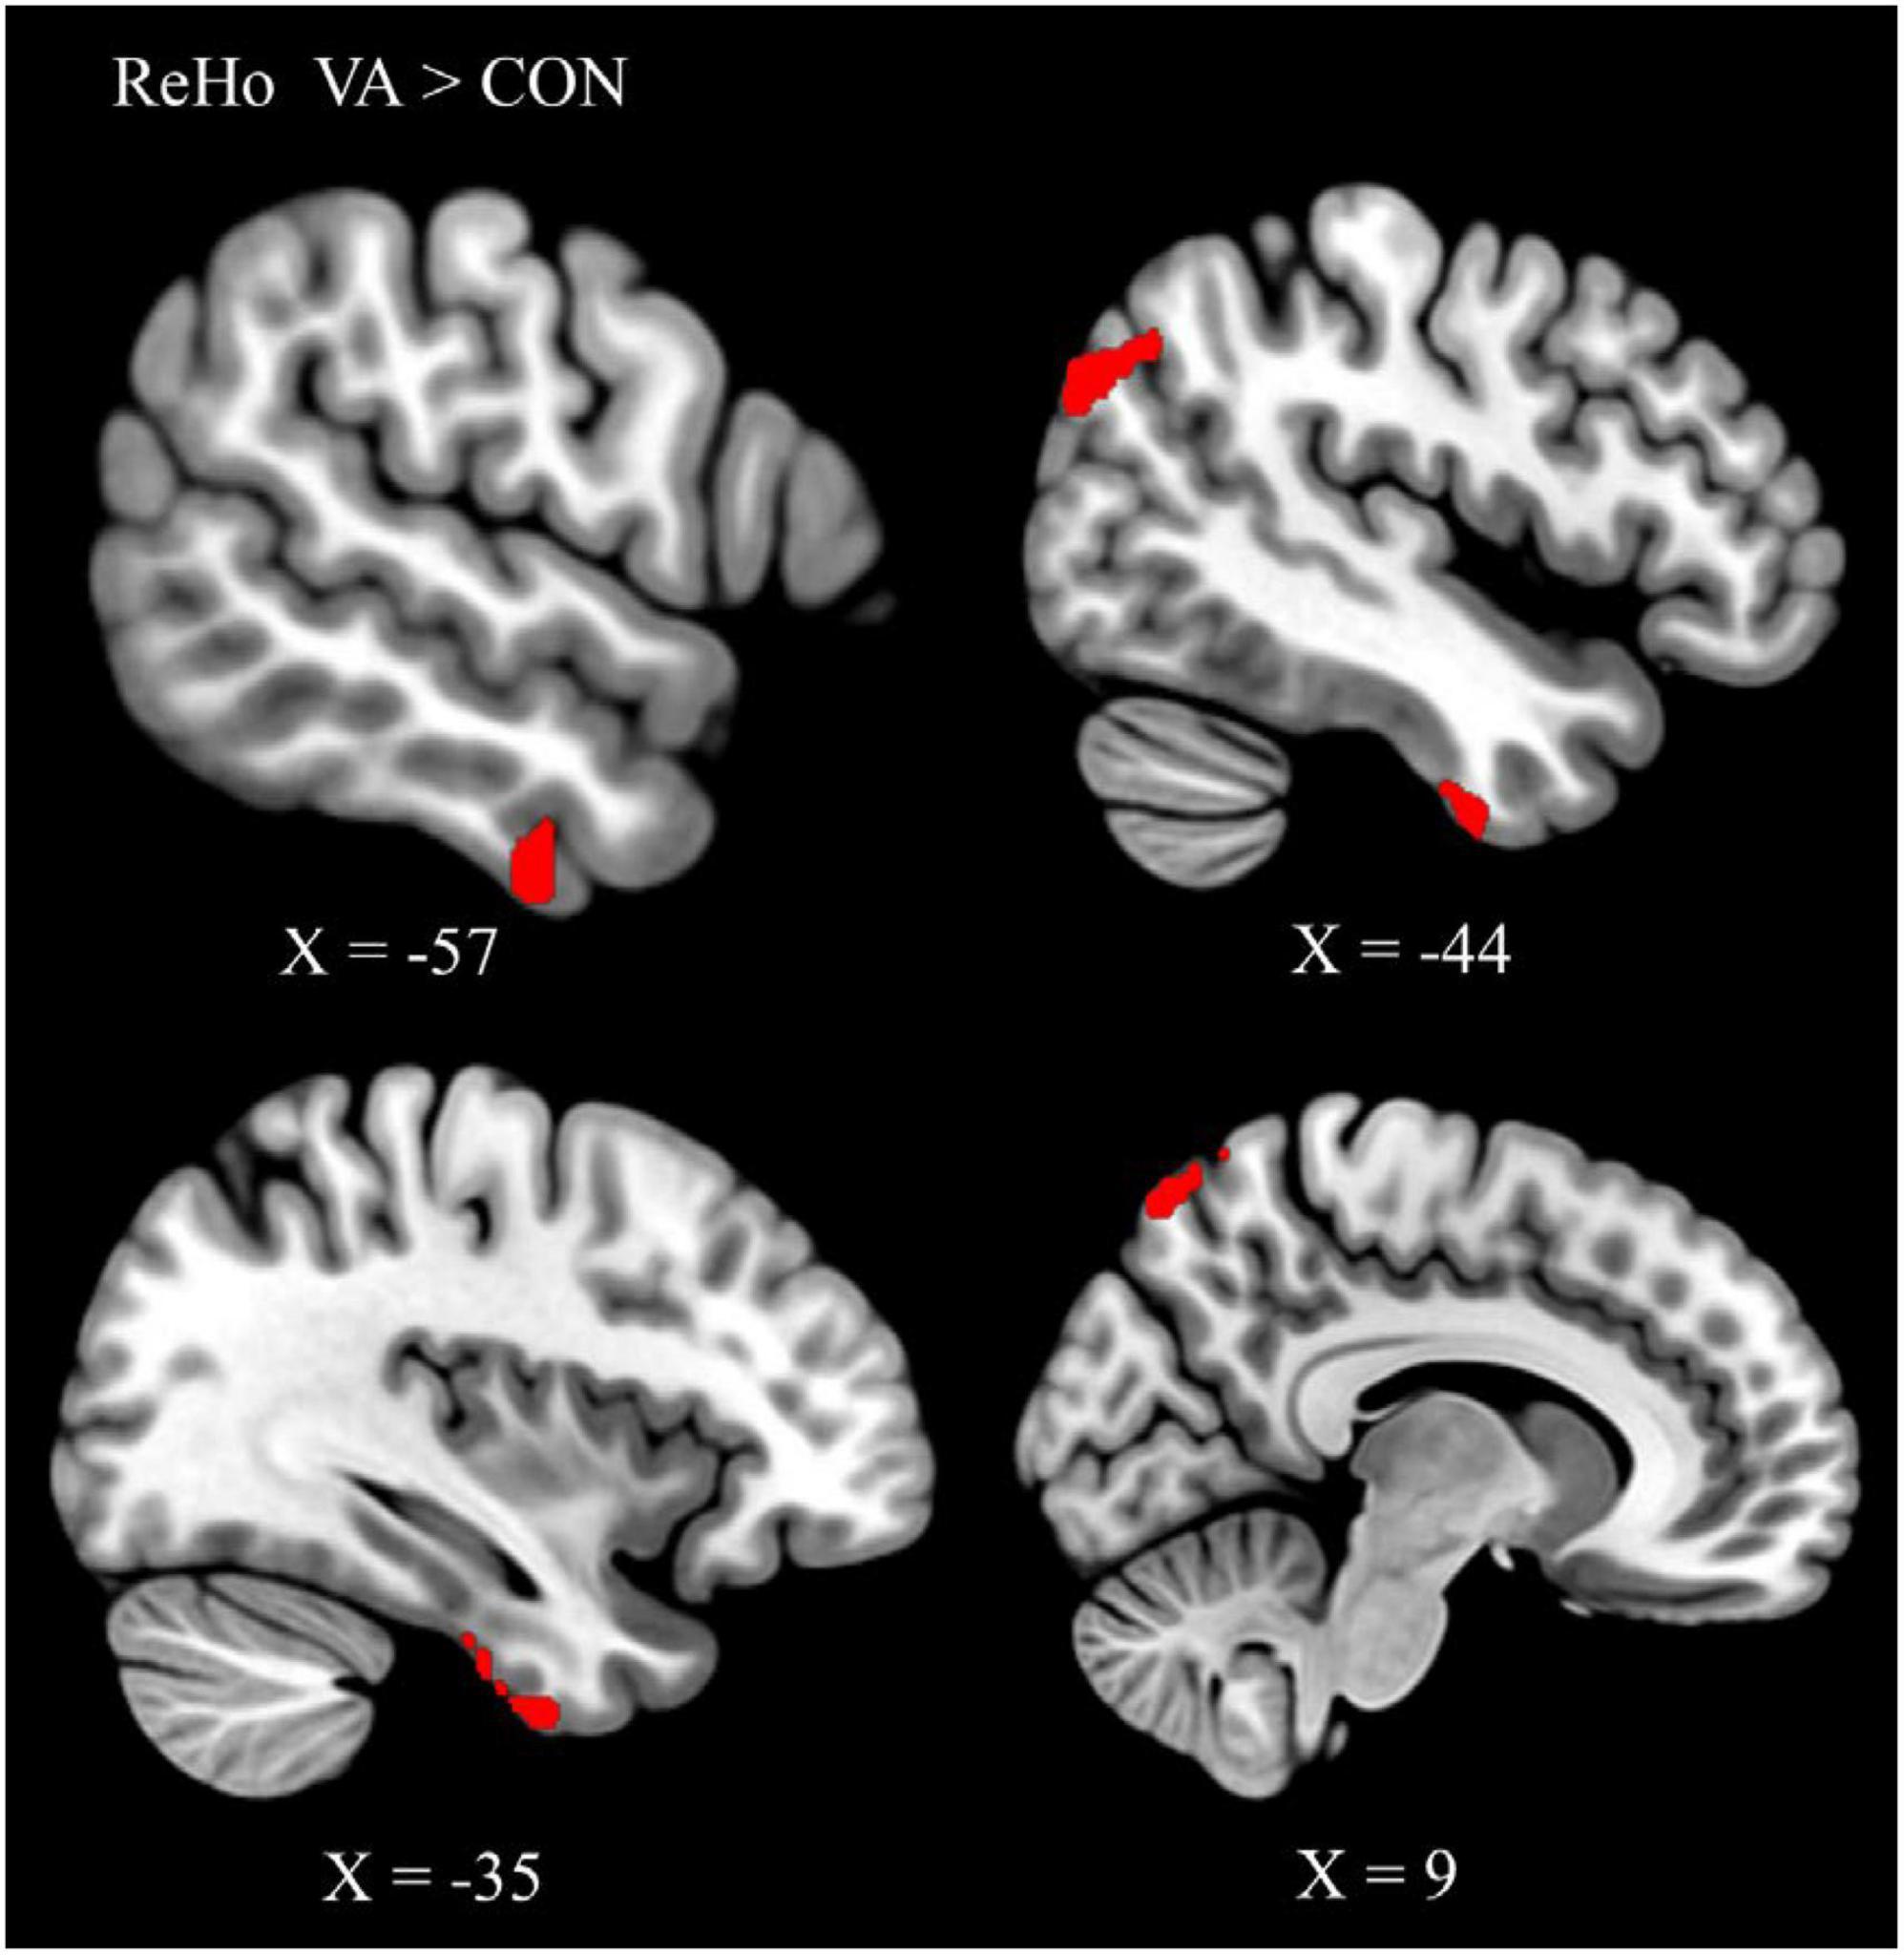 Enhanced intrinsic functional connectivity in the visual system of visual artist: Implications for creativity